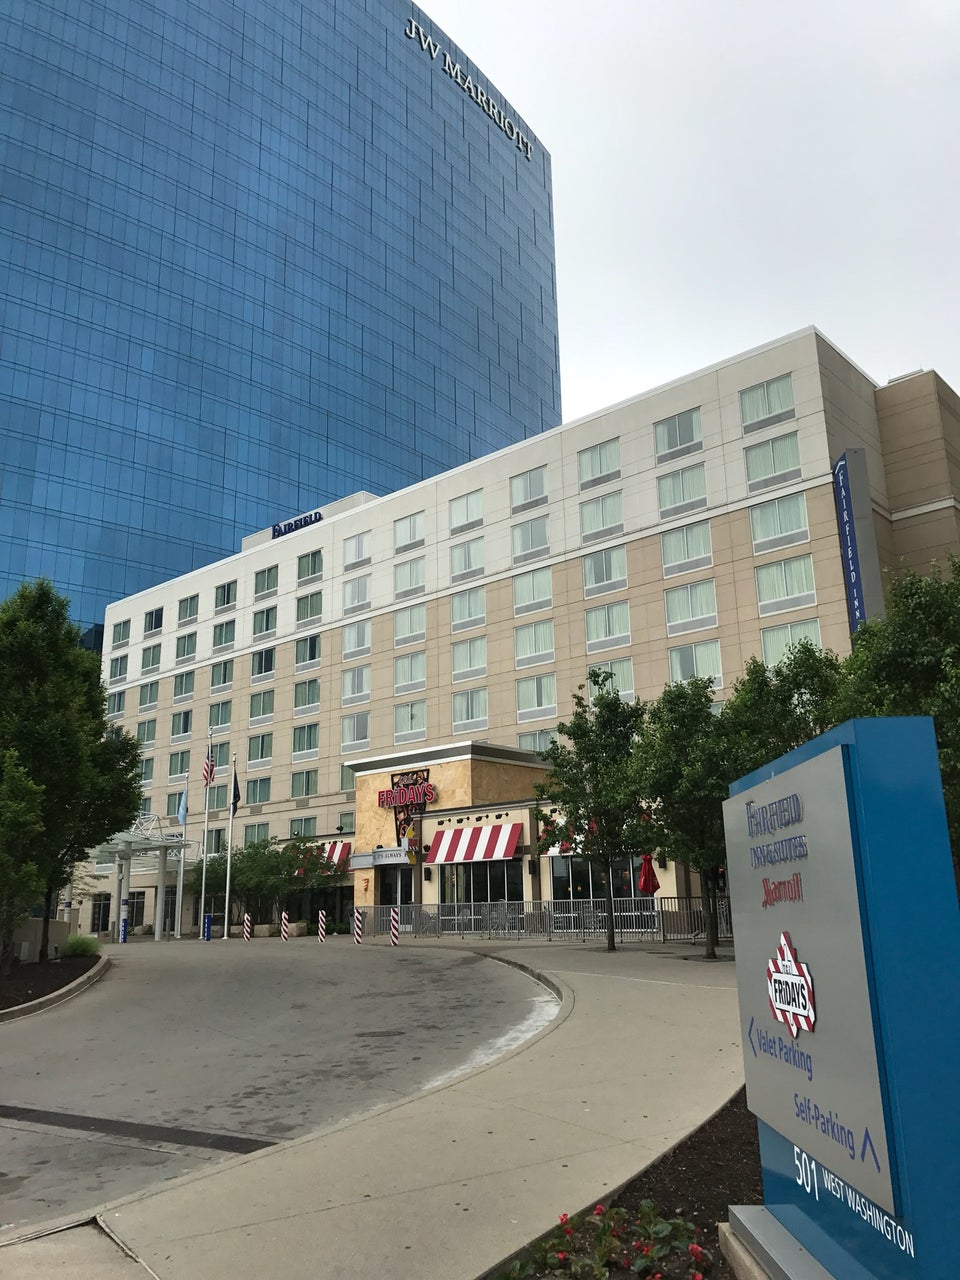 Photo of FairField Inn & Suites Indianapolis Downtown